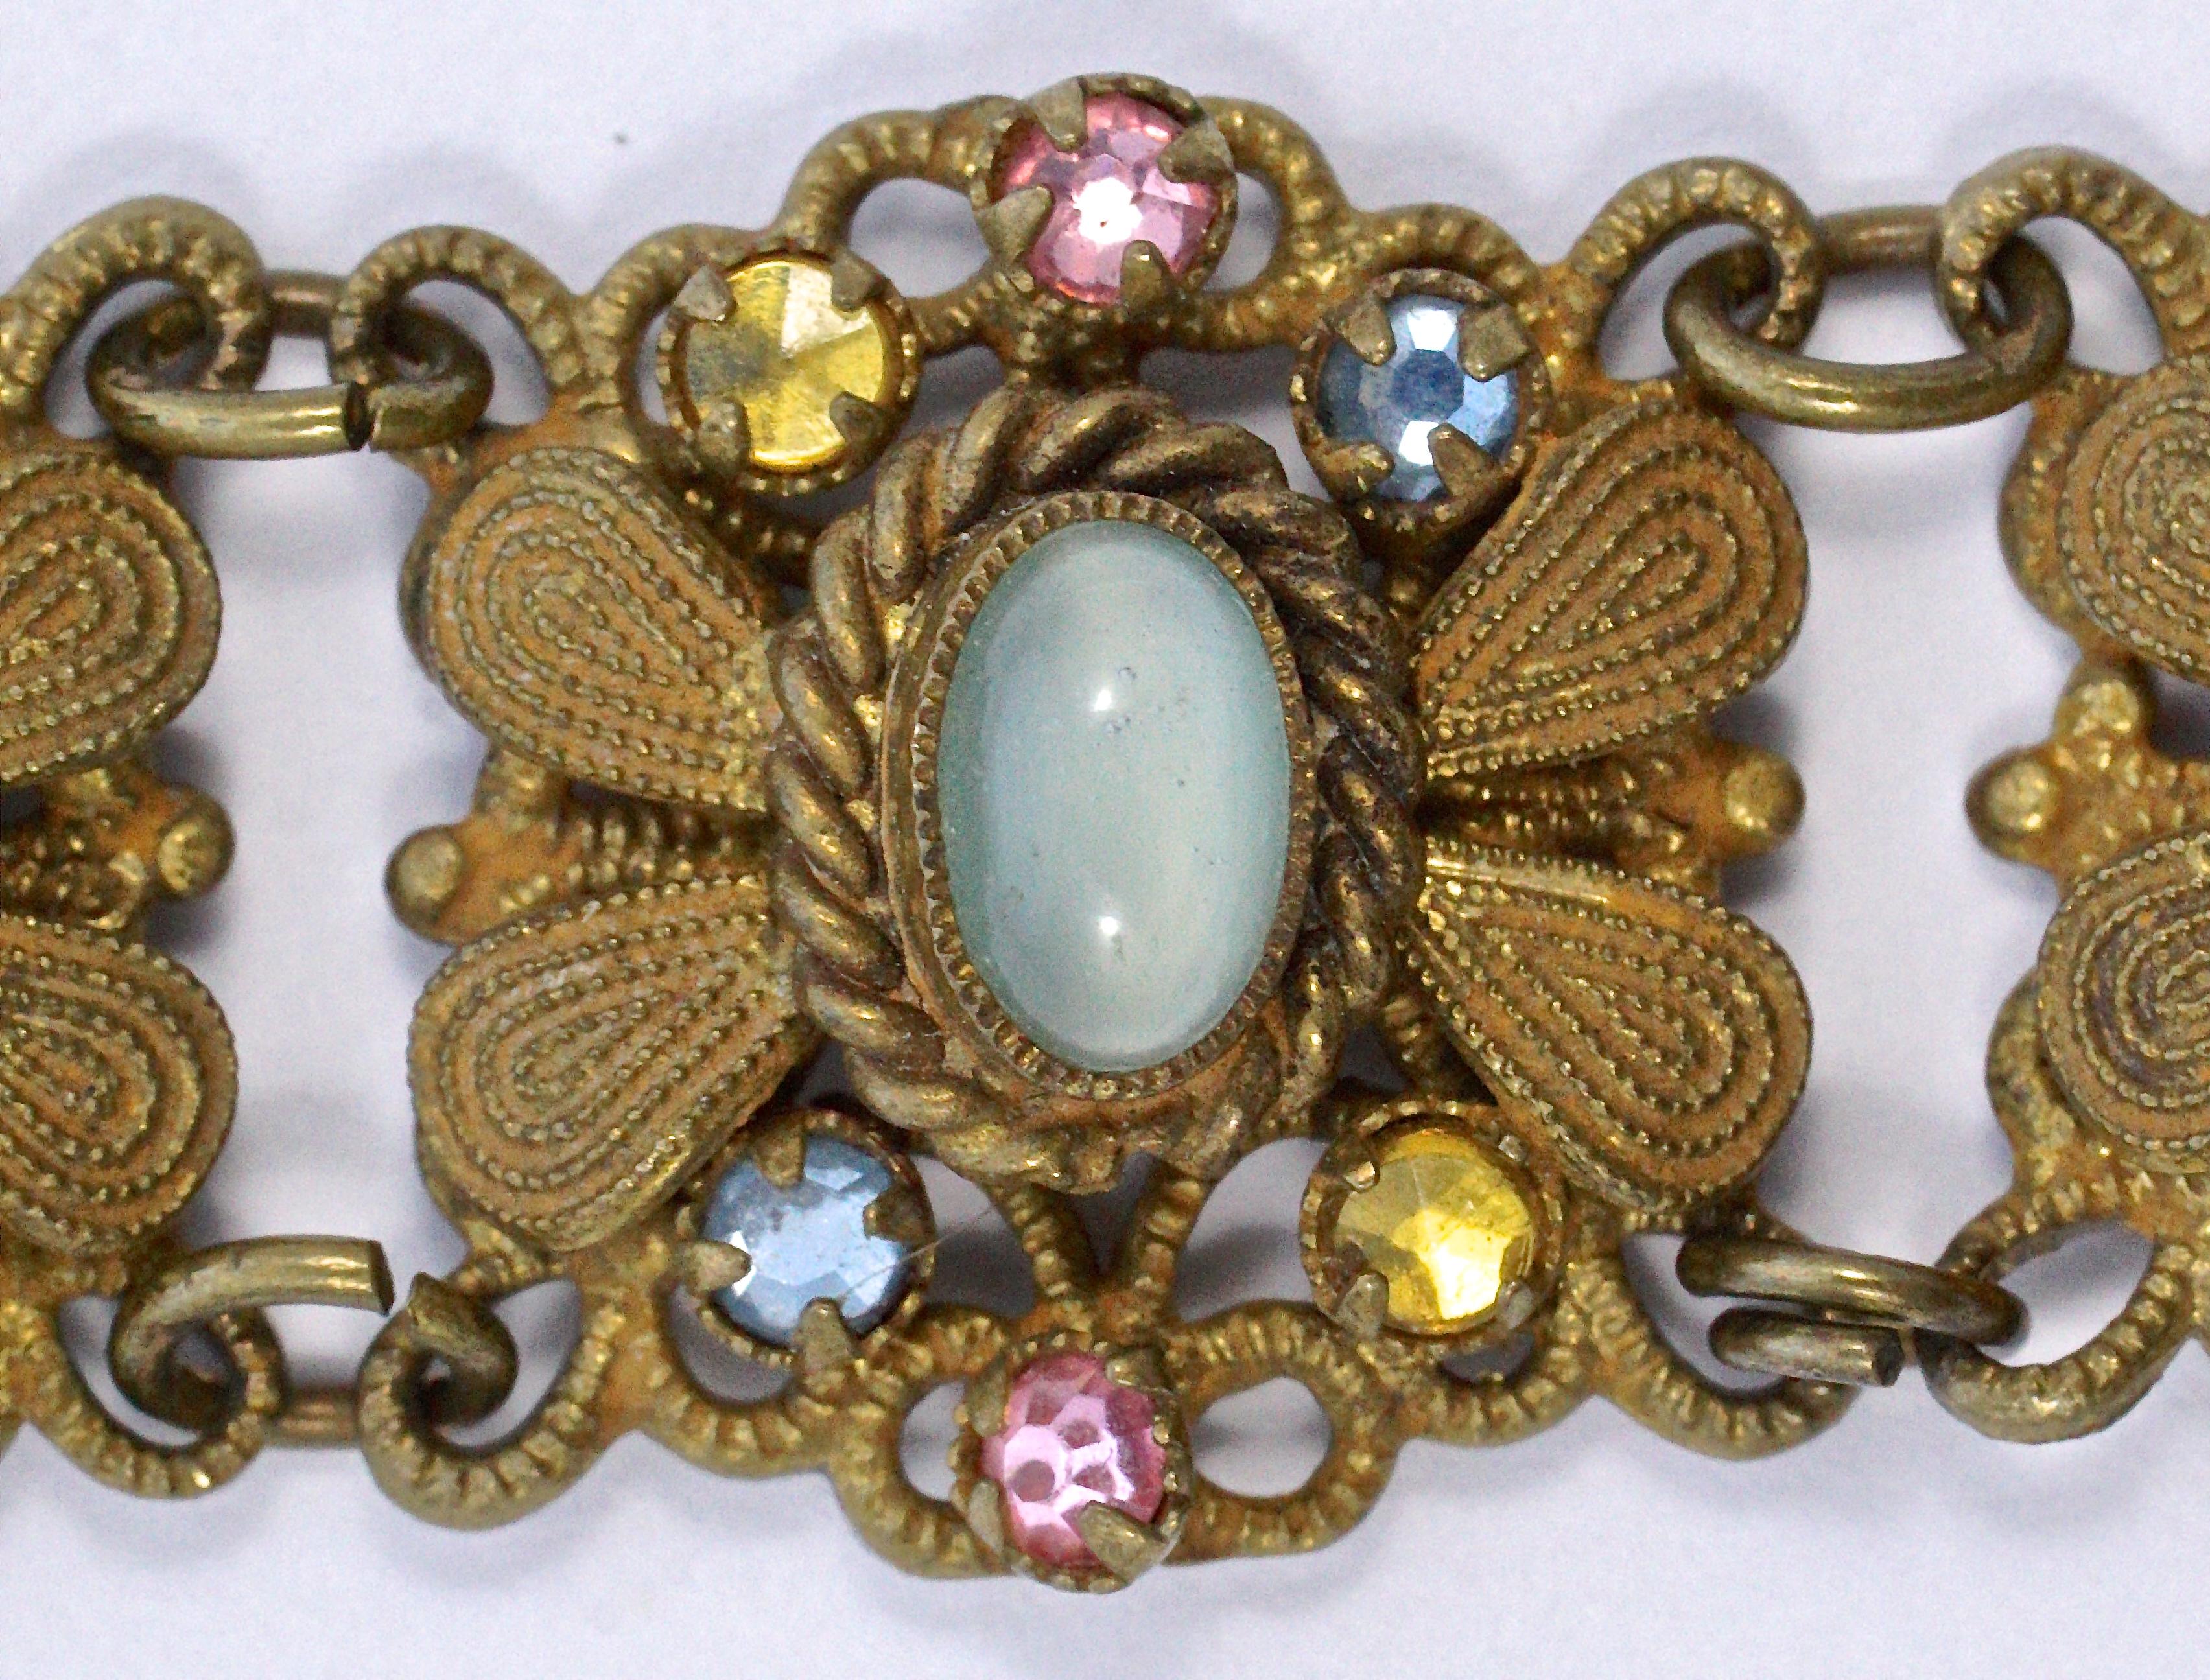 
Czech gold tone filigree detail link bracelet, featuring pale aqua moonglow cabochons in rope twist settings, and blue, pink and golden rhinestones. Measuring 16.5cm / 6.49 inches by 1.6cm / .63 inches, this vintage bracelet will fit a small wrist.